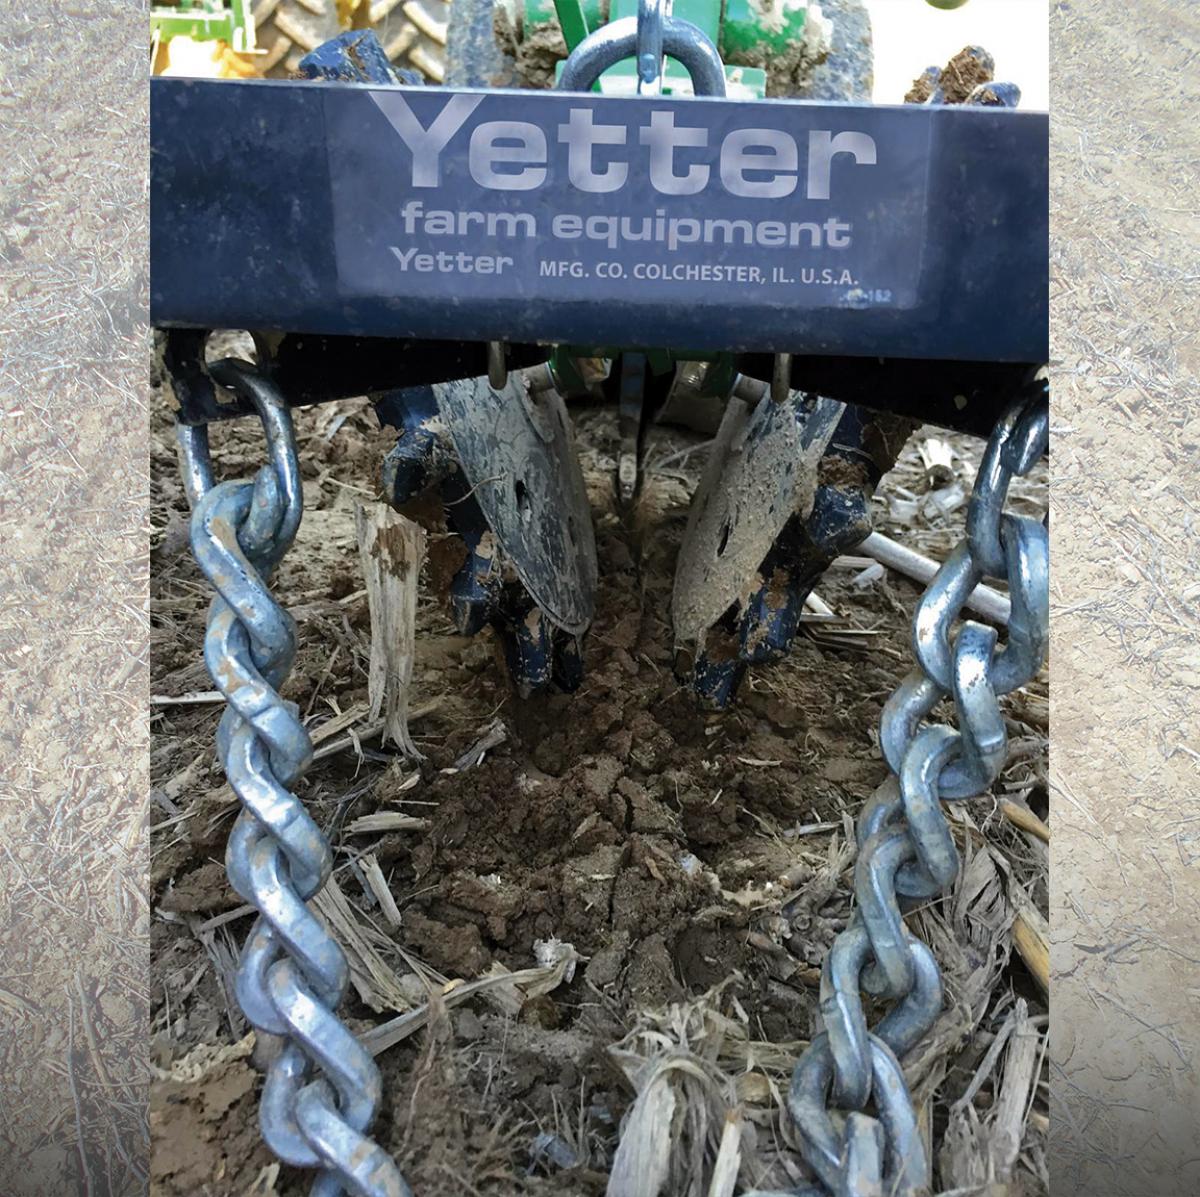 Closeup of 6200 Twister Poly Closing Wheels with drag chain closing seed furrow